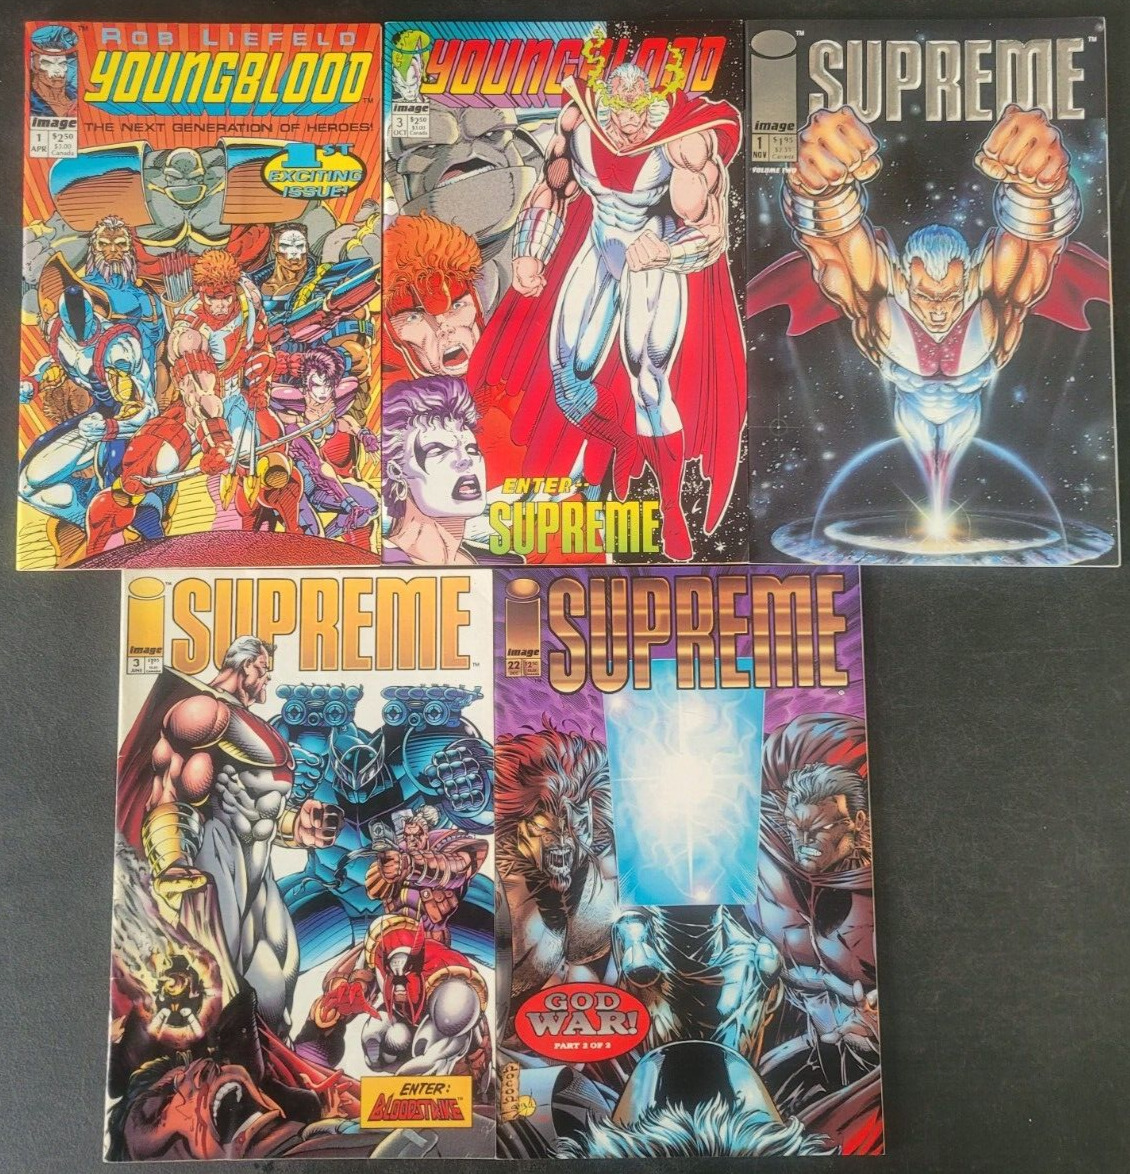 YOUNGBLOOD #1 & 3 (1992) IMAGE 1ST APPEARANCE 1ST SUPREME ROB LIEFELD BONUS